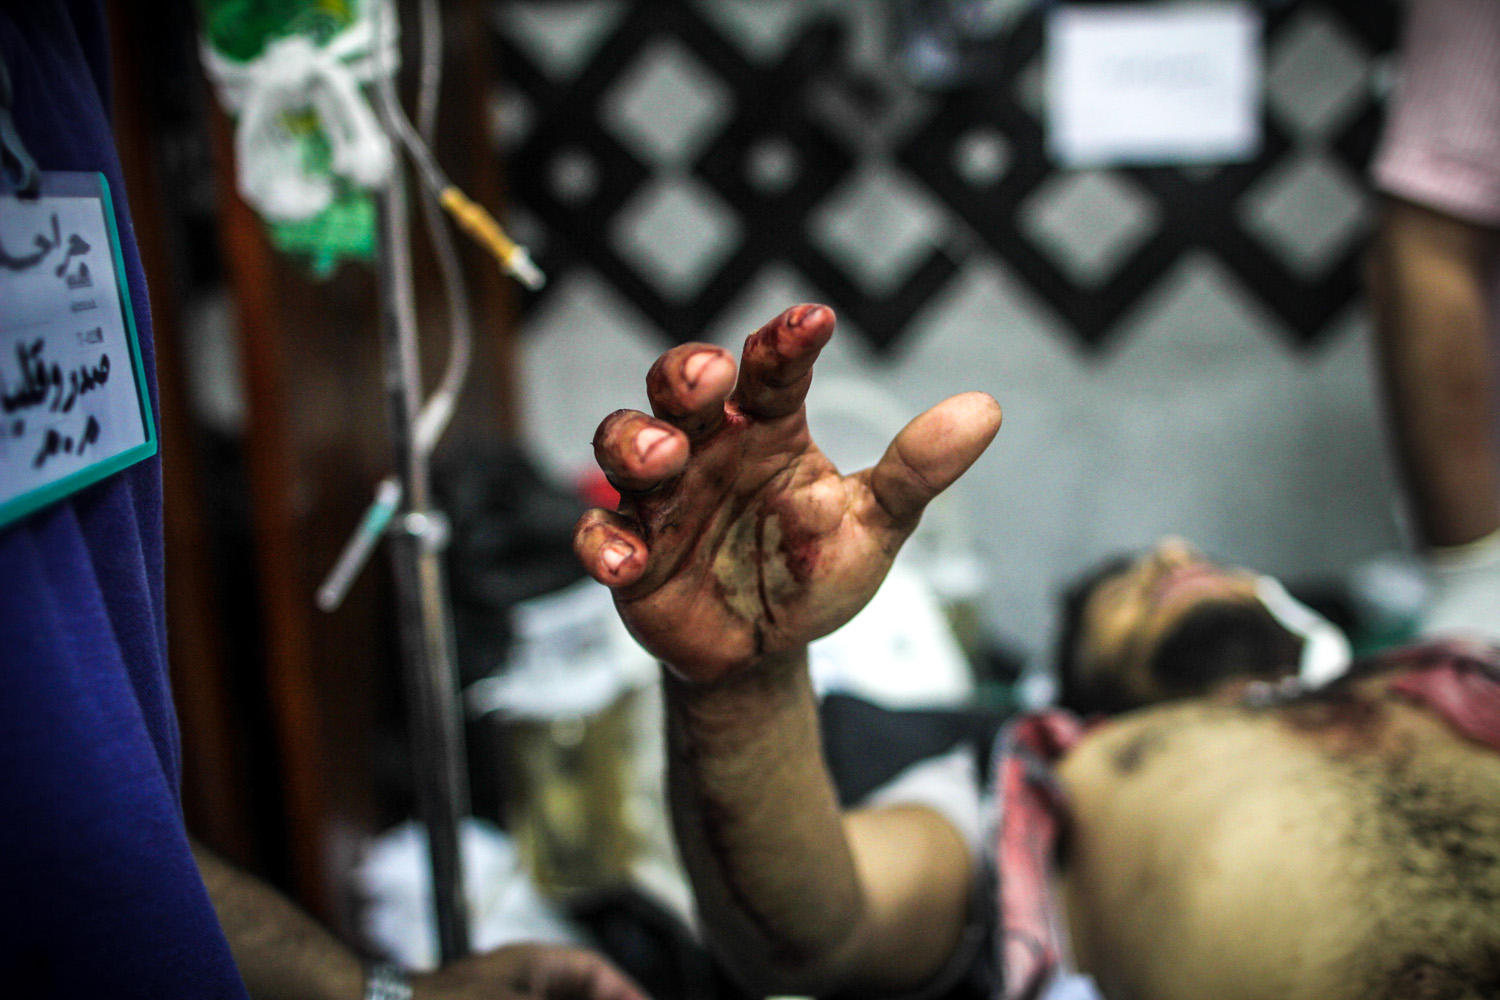 July 27, 2013. An injured supporter of ousted president Mohamed Morsi pleads for help at a makeshift hospital in Rabaa.